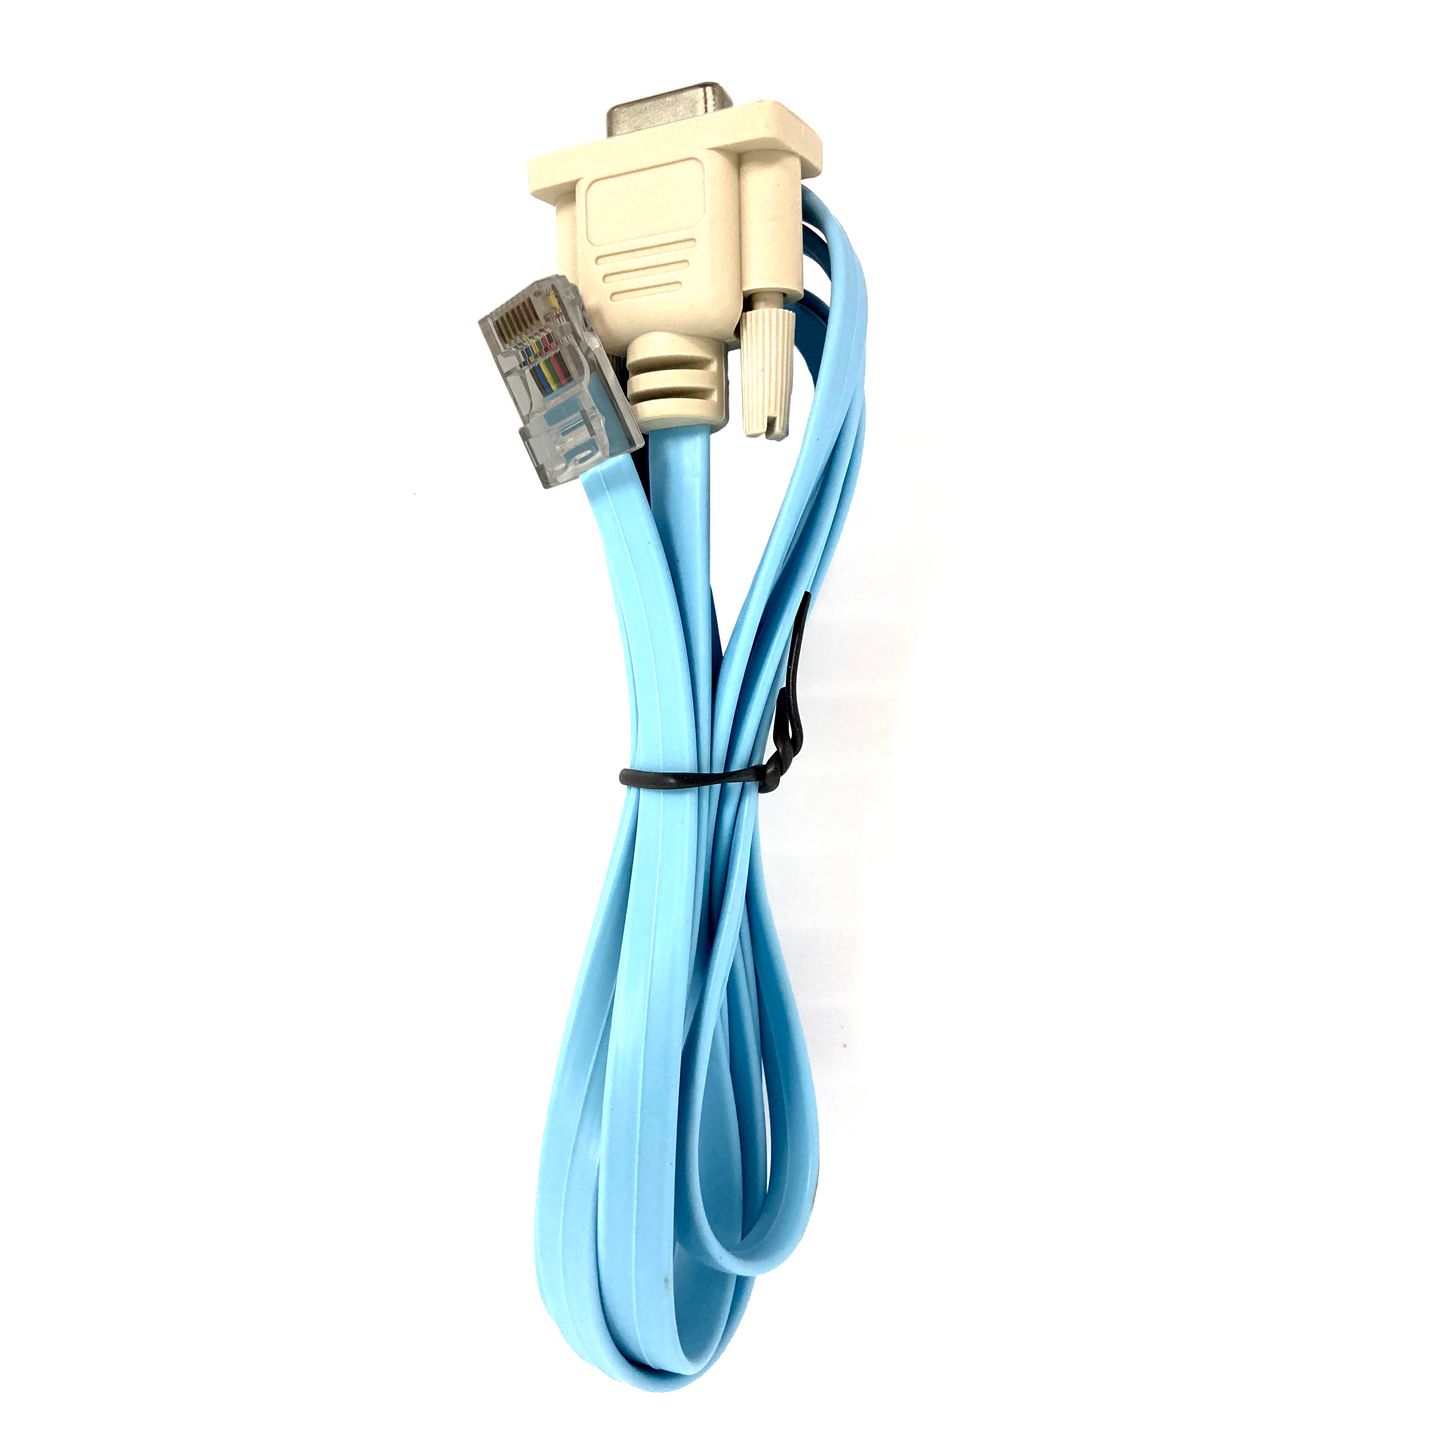 The Serial Touch Cable runs from the motherboard to the I/O Board responsible for registering touch.